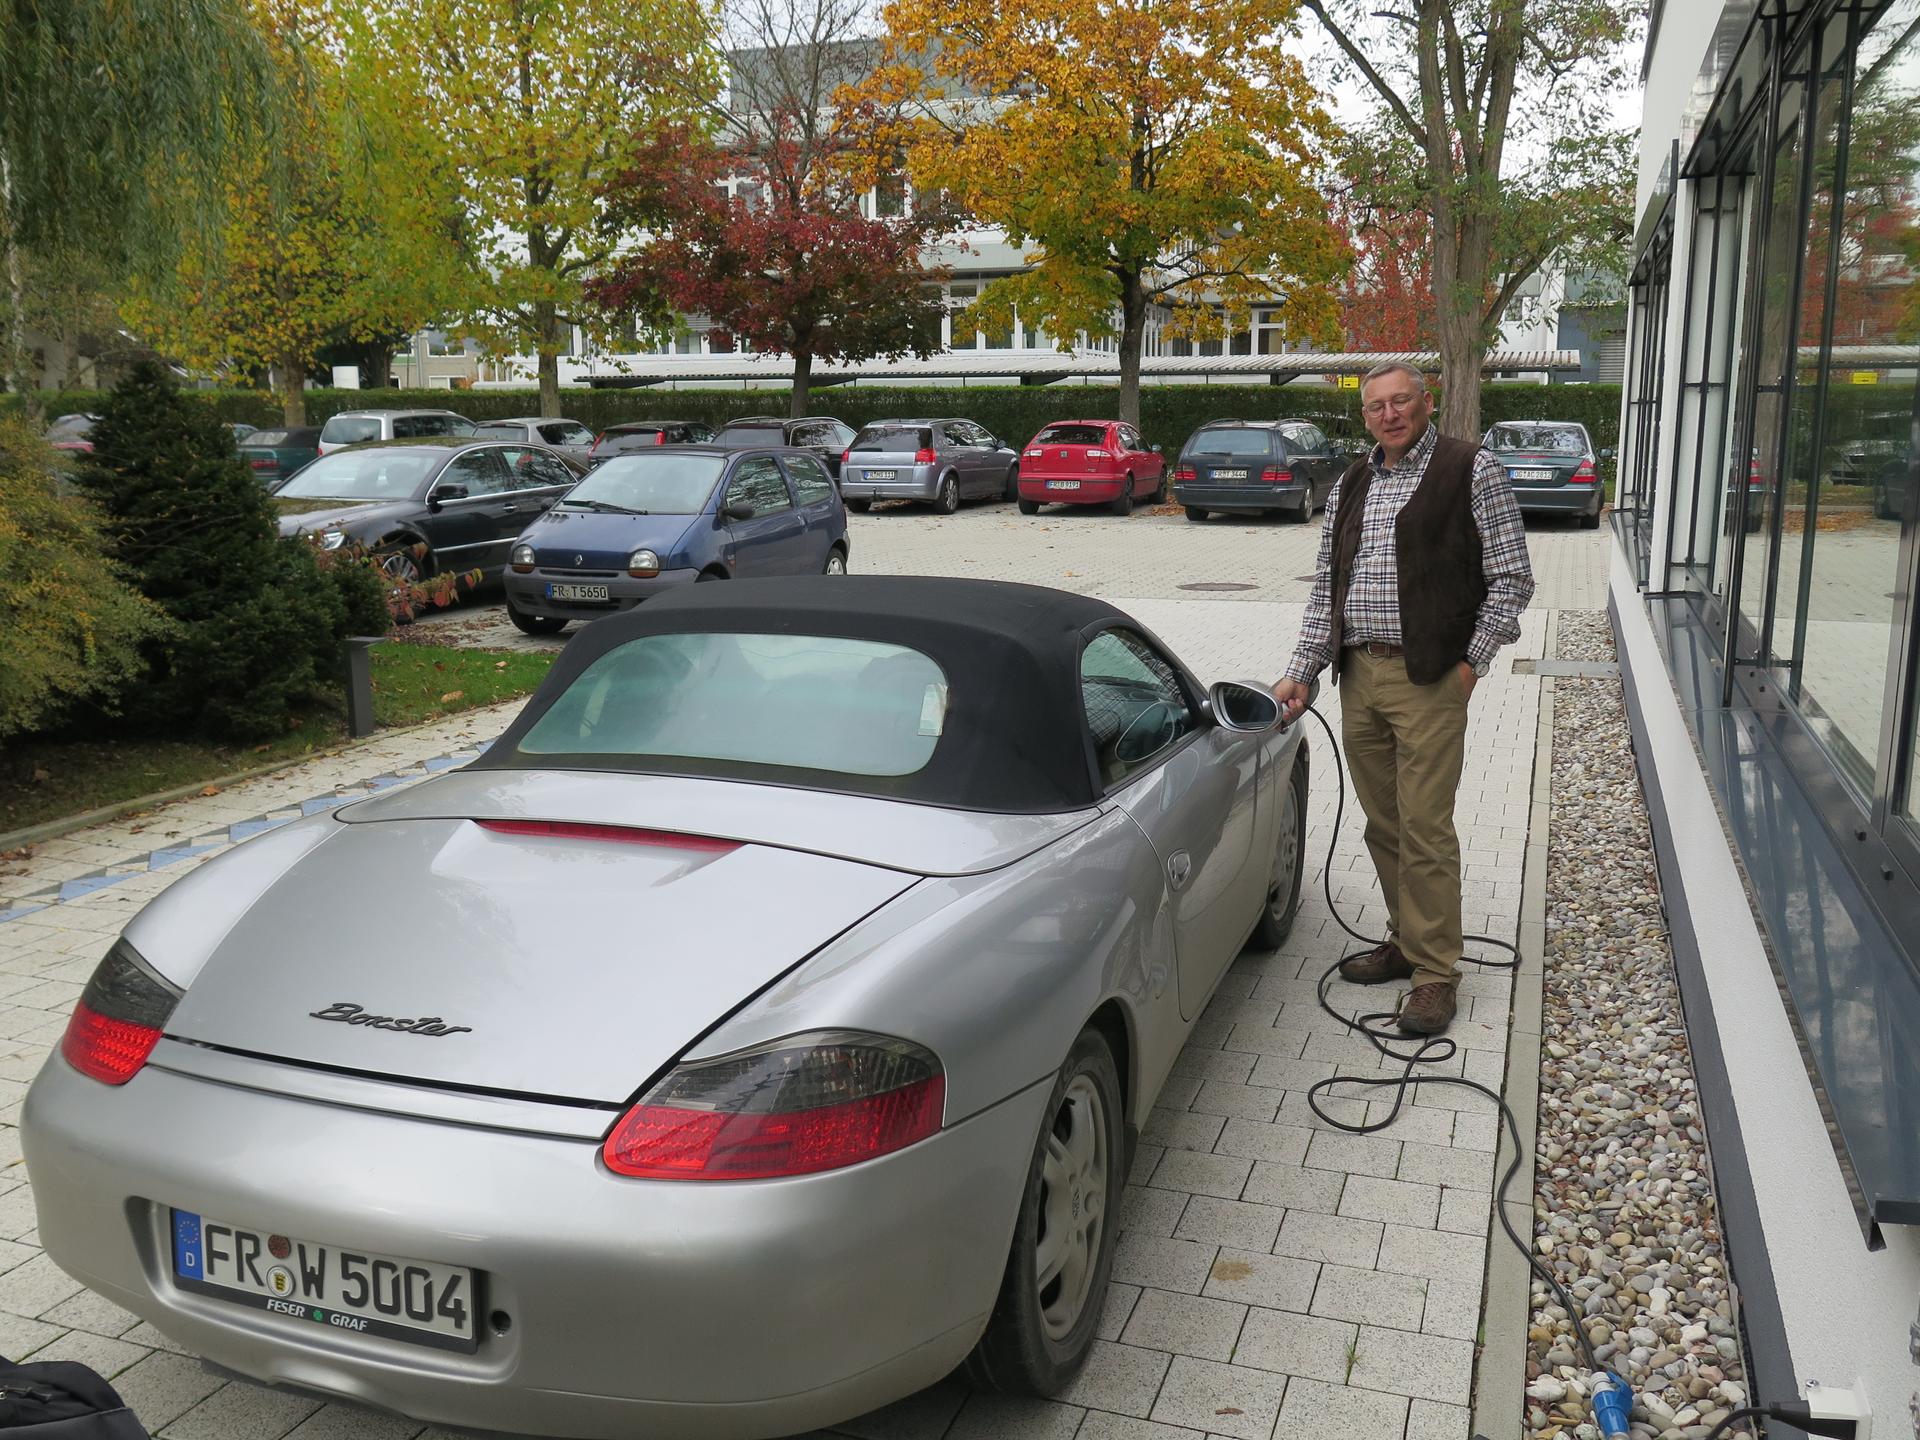 An old-school garage tinkerer, Wolfram Walter also converted his bicycle and this Porsche to run on electricity, often provided by the solar panels on his roof.